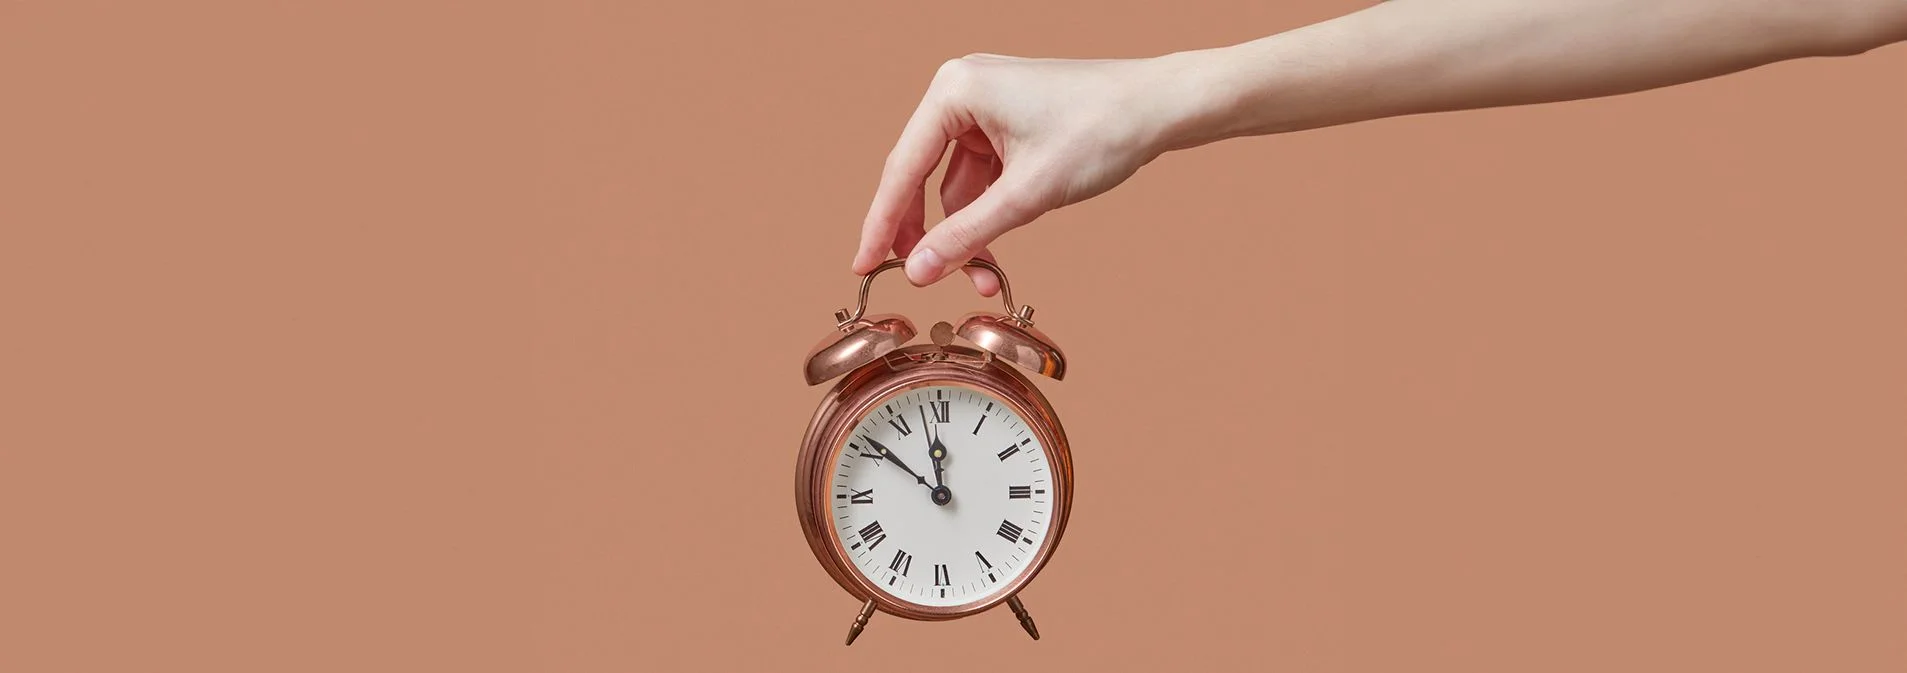 A hand holding a retro copper alarm with a salmon pink background